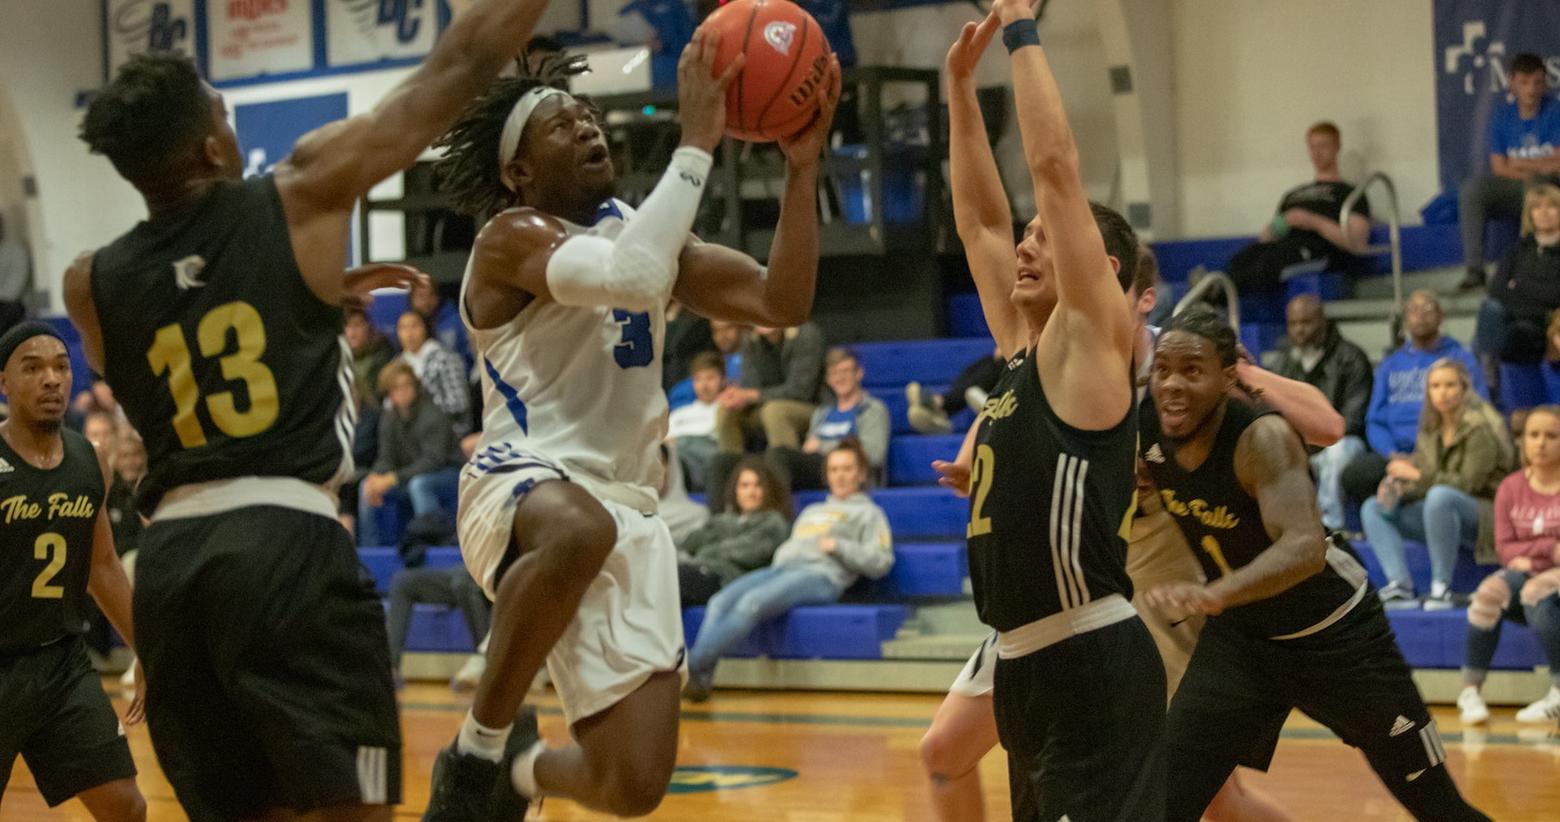 Qadhafi Turner scored a season-high 16 points in an all-around effort to help lead Brevard past Maryville at The Bosh (Photo courtesy of Thom Kennedy '21).